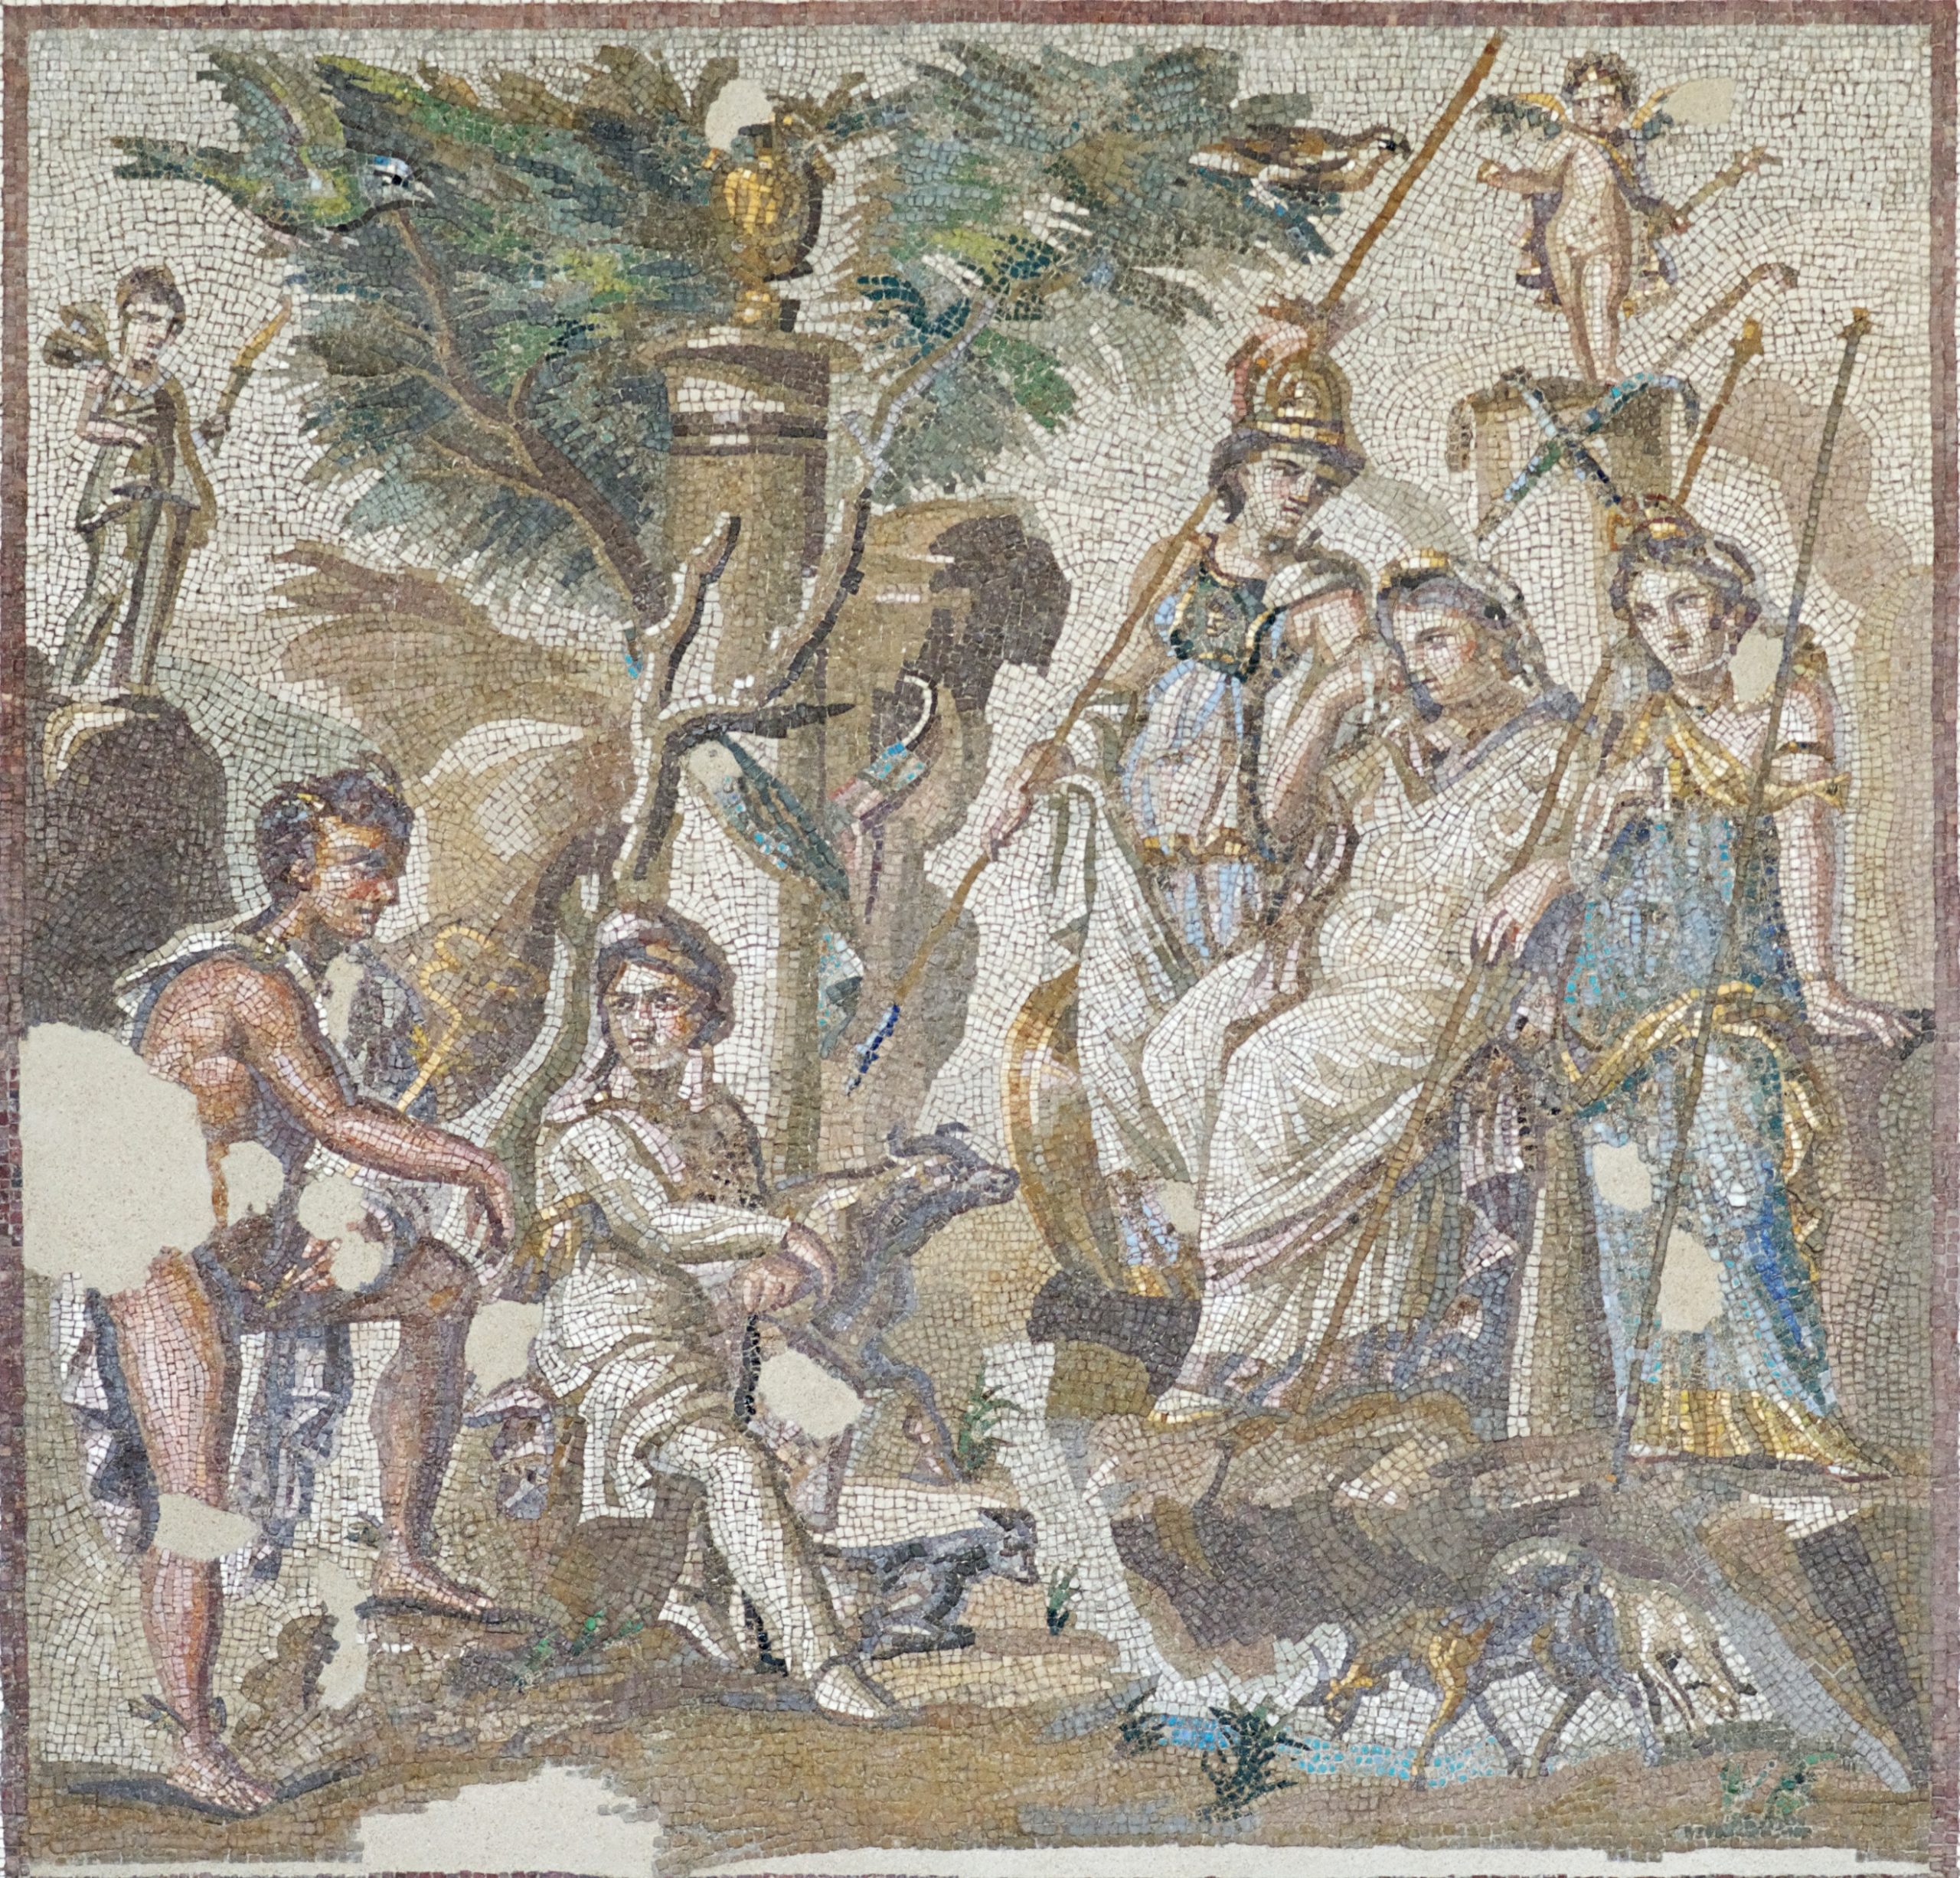 Paris sits in front of Hera, Aphrodite, and Athena. Various animals, cupids, and other figures watch the scene.